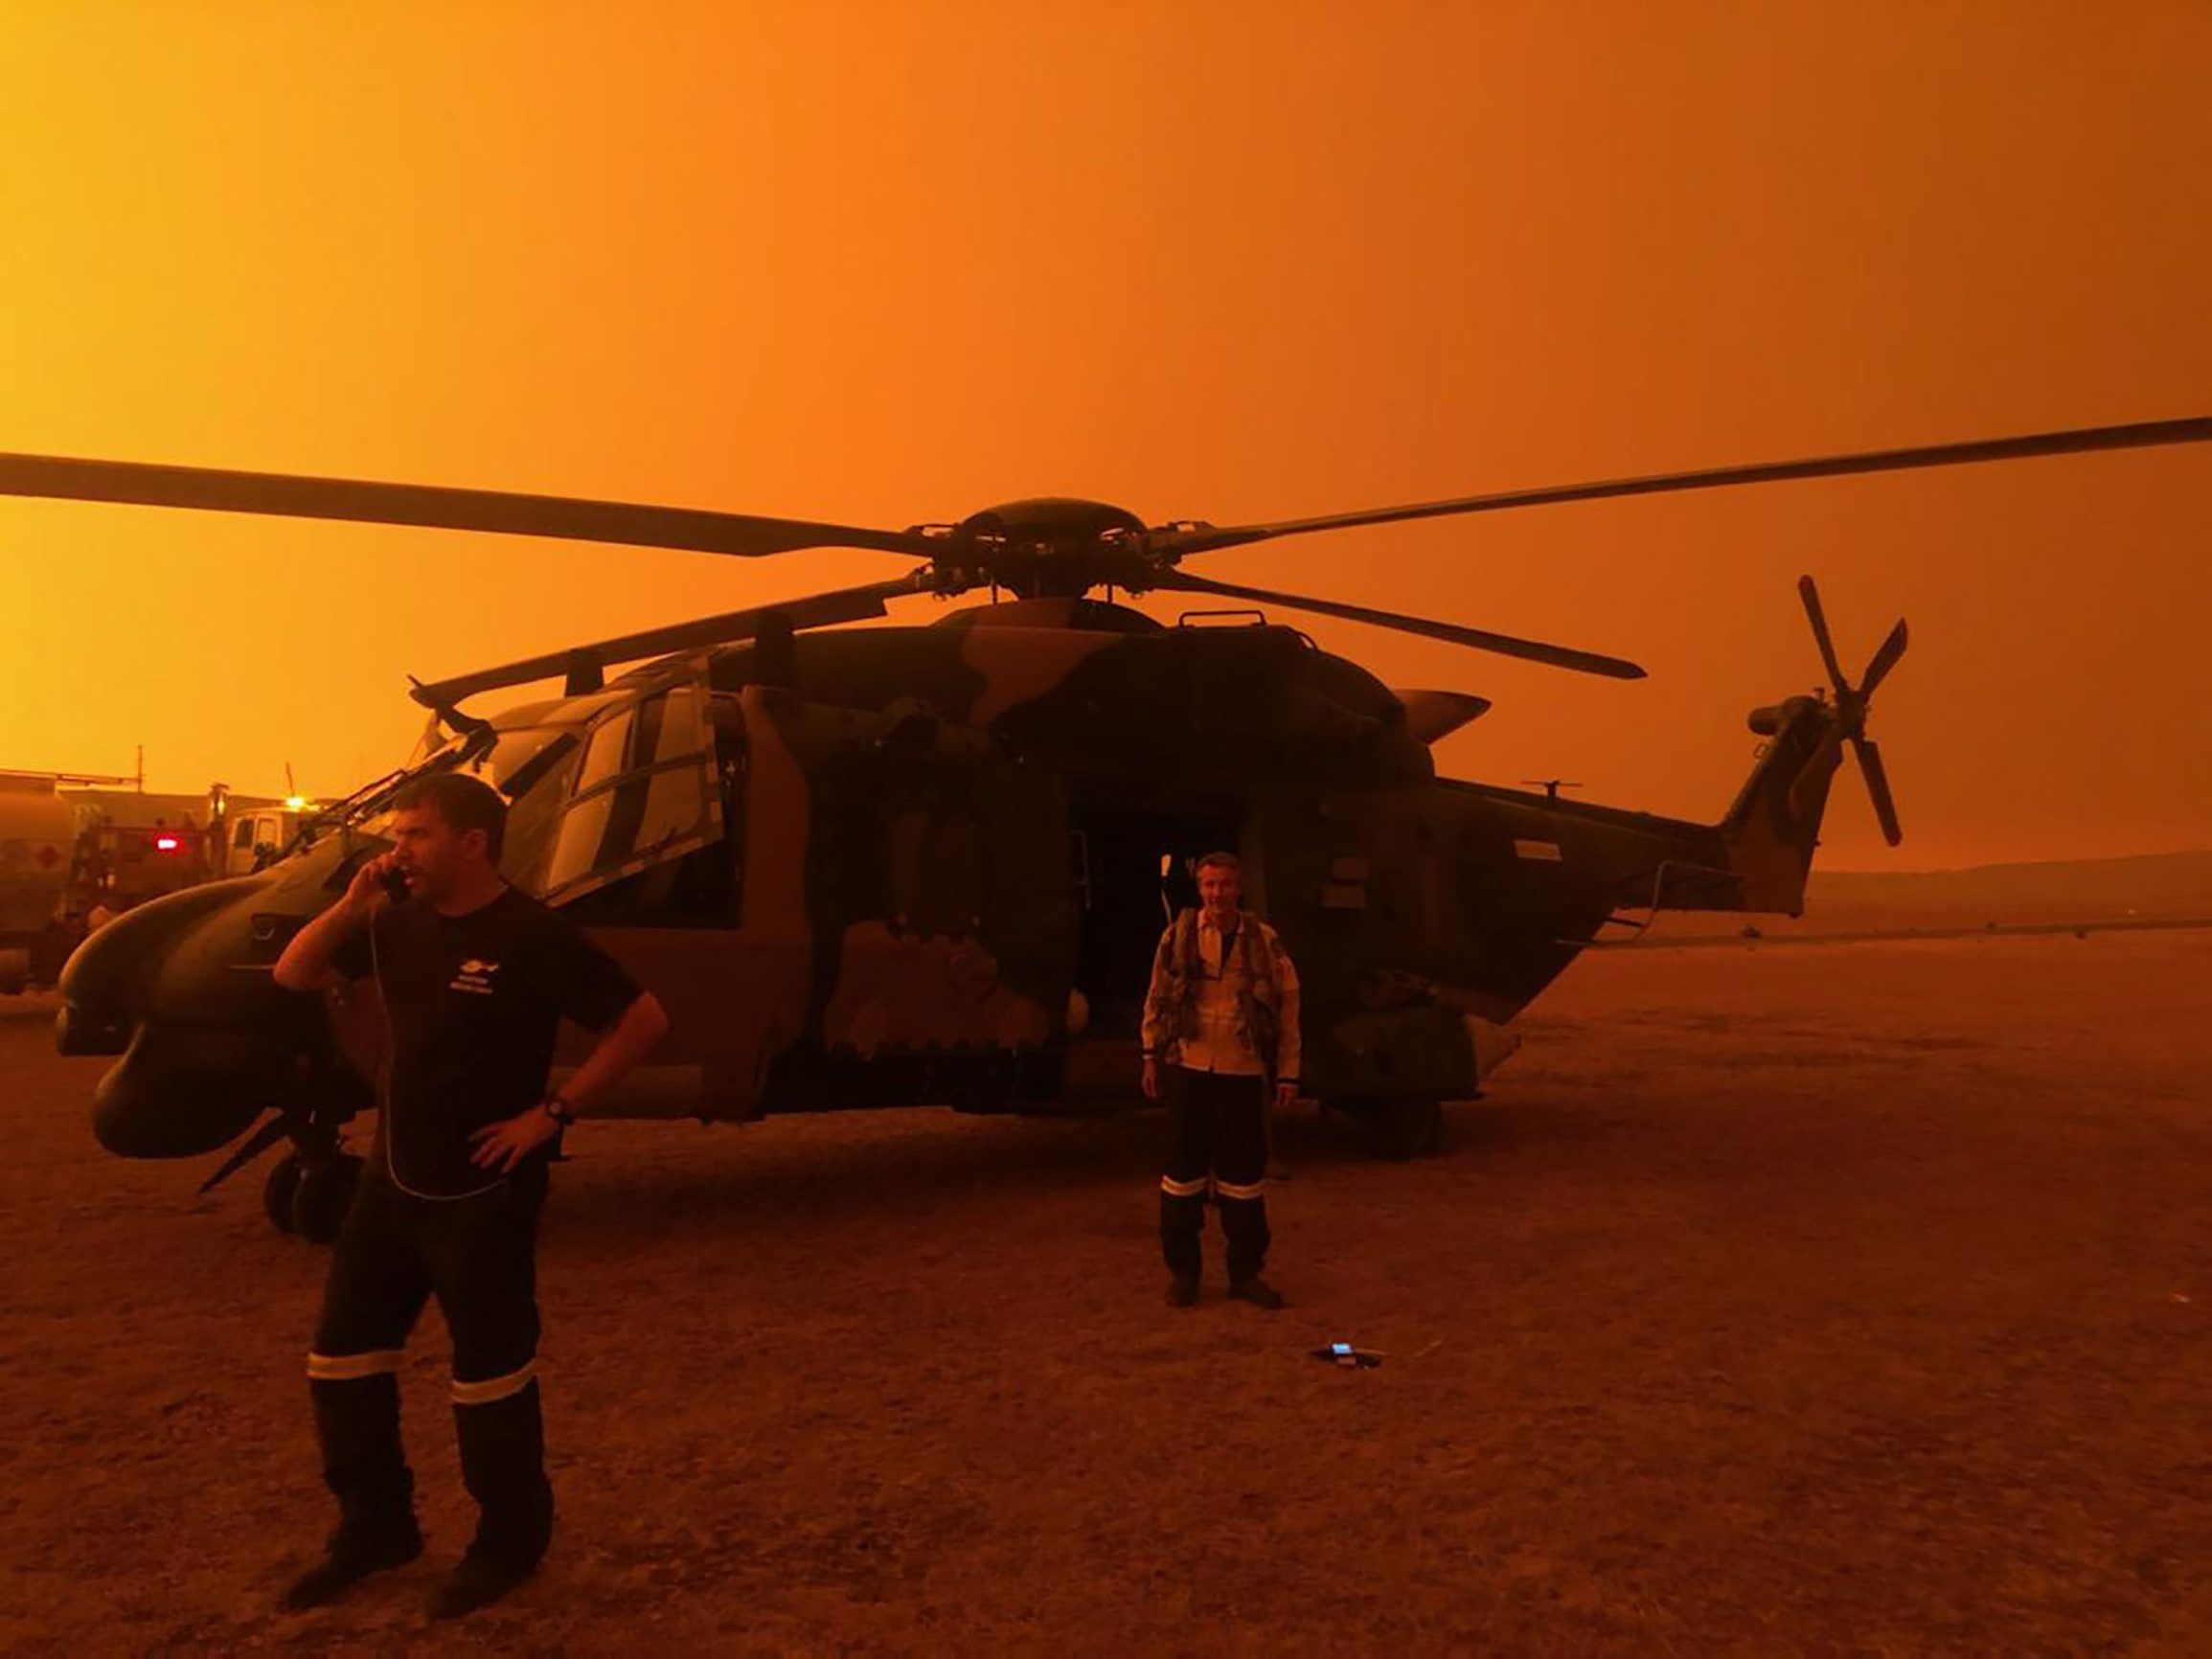 This undated handout photo received on January 5, 2020 from the Australian Department of Defence shows red skies from bushfires hanging over an Army 6 Aviation Regiment MRH-90 at Polo Flat, Cooma, during bushfire relief efforts. - Australians on January 5 counted the cost from a day of catastrophic bushfires that caused 